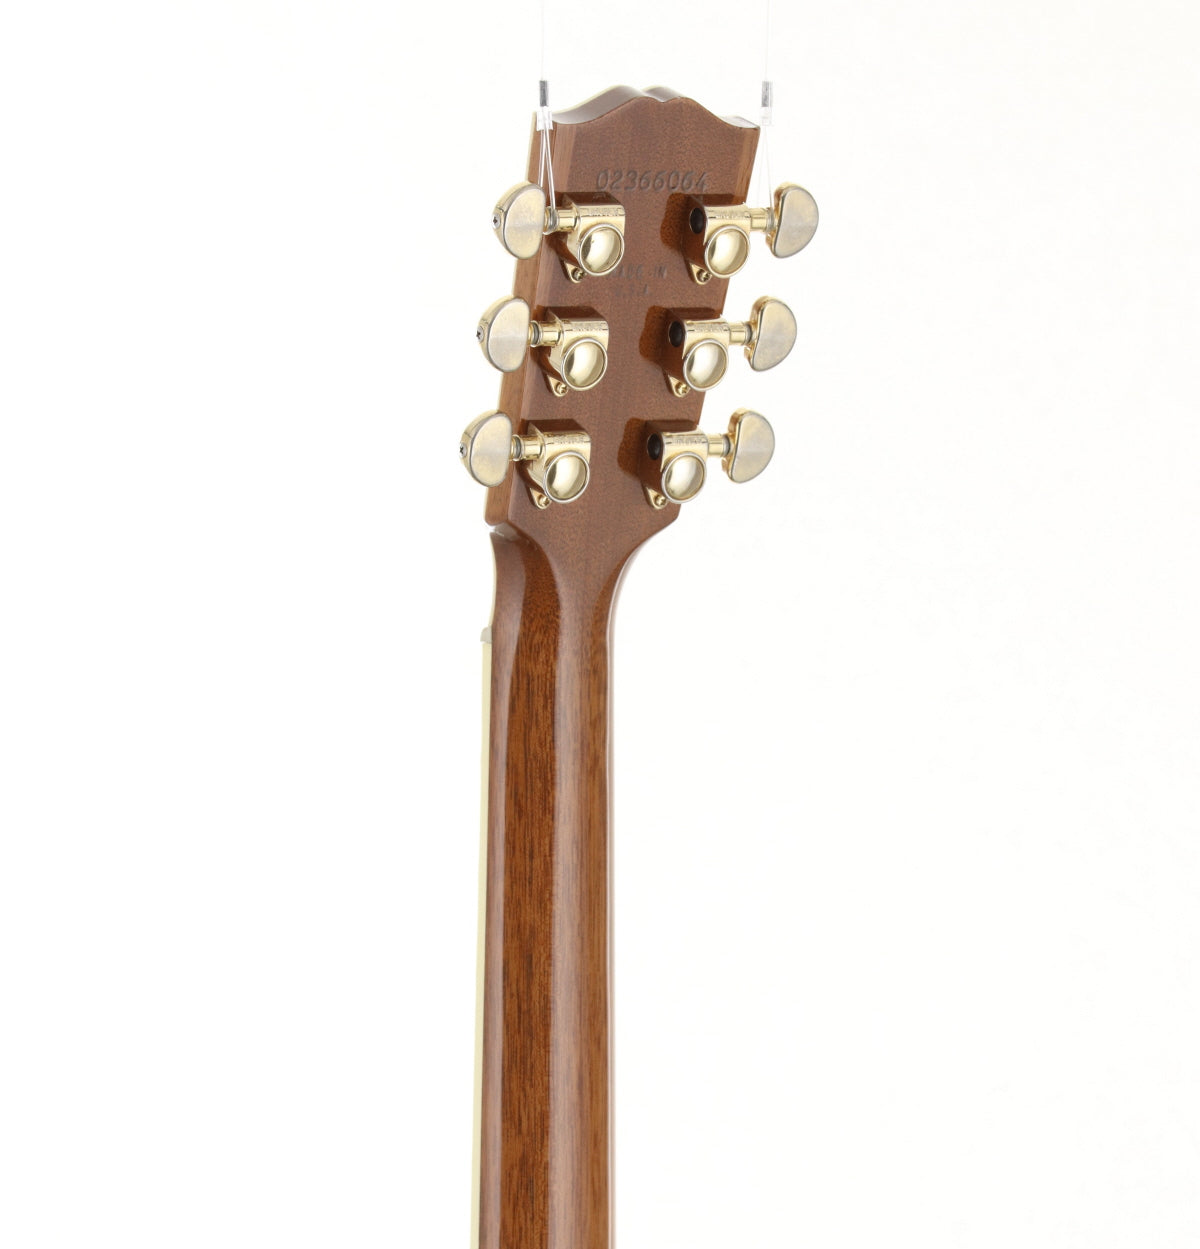 [SN 02366064] USED Gibson / J-185 EC Rosewood Antique Natural 2006 [09]